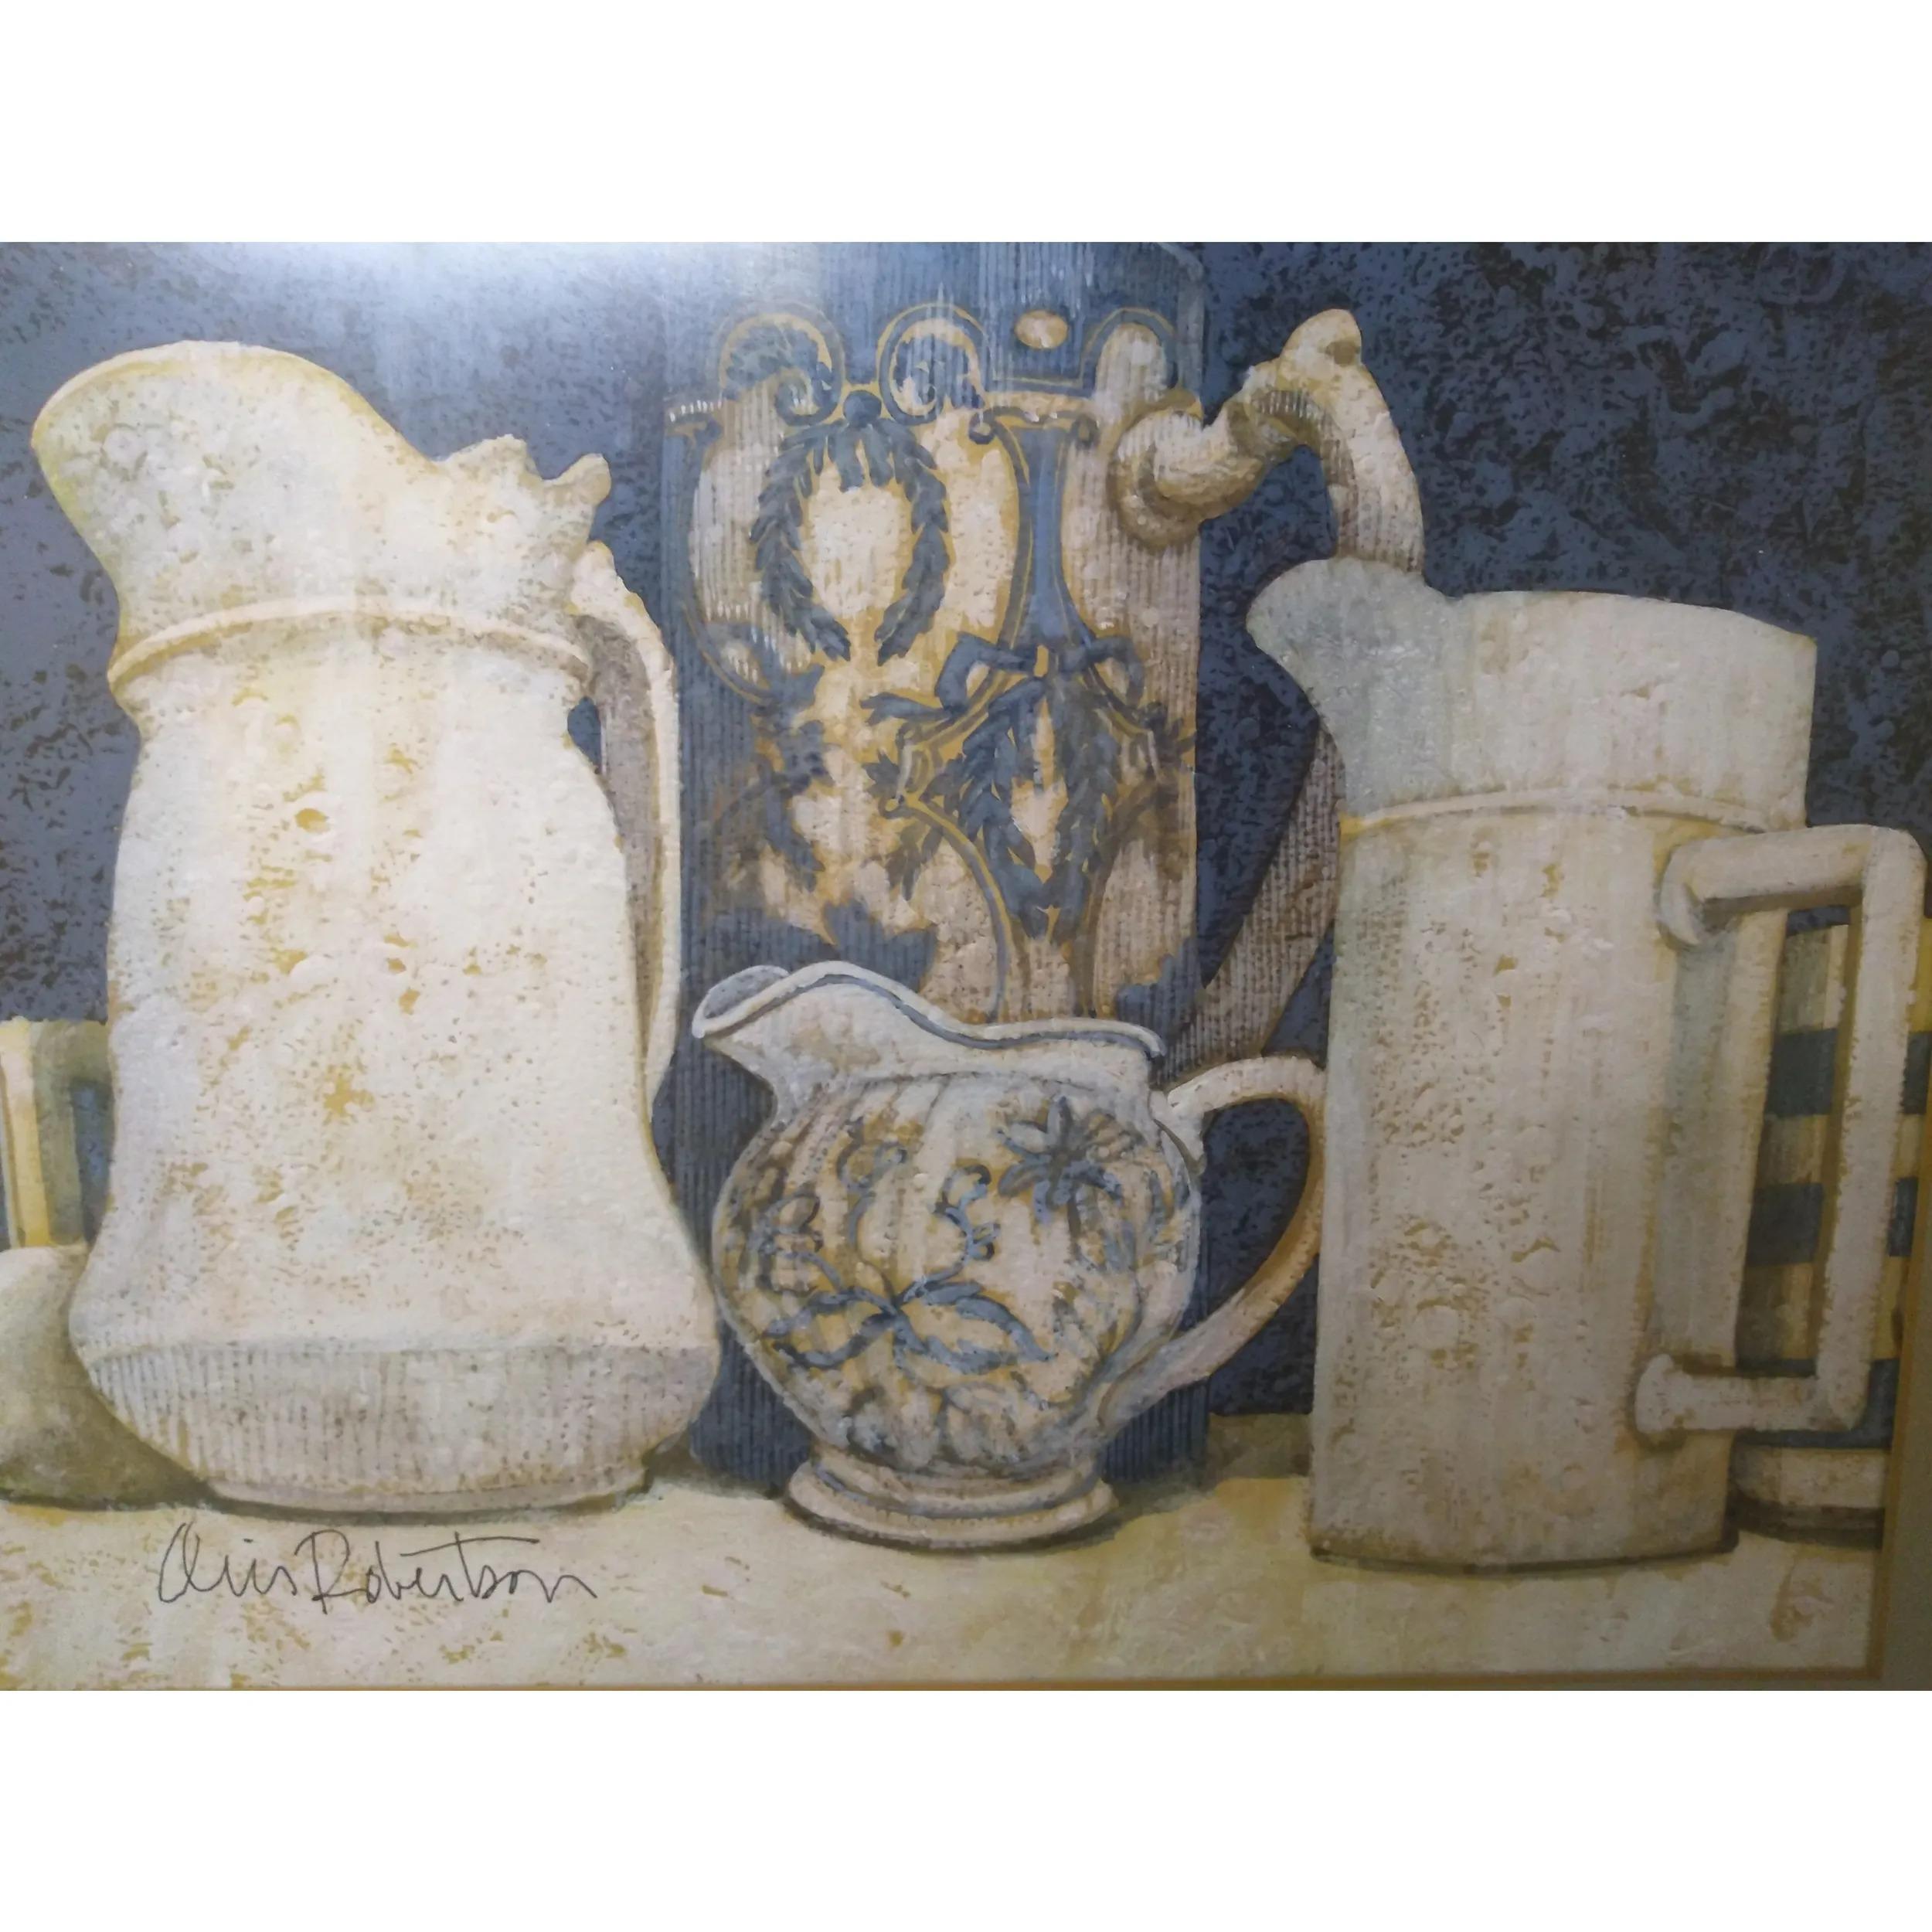 Still Life in Oil by Oris Roberstson
1970s

Still life of ceramics in a neutral palette by Texas artist Oris Robertson. 

Oris Robertson was a prolific visual artist, he started painting and drawing as a boy in Brownsville, Texas in the mid